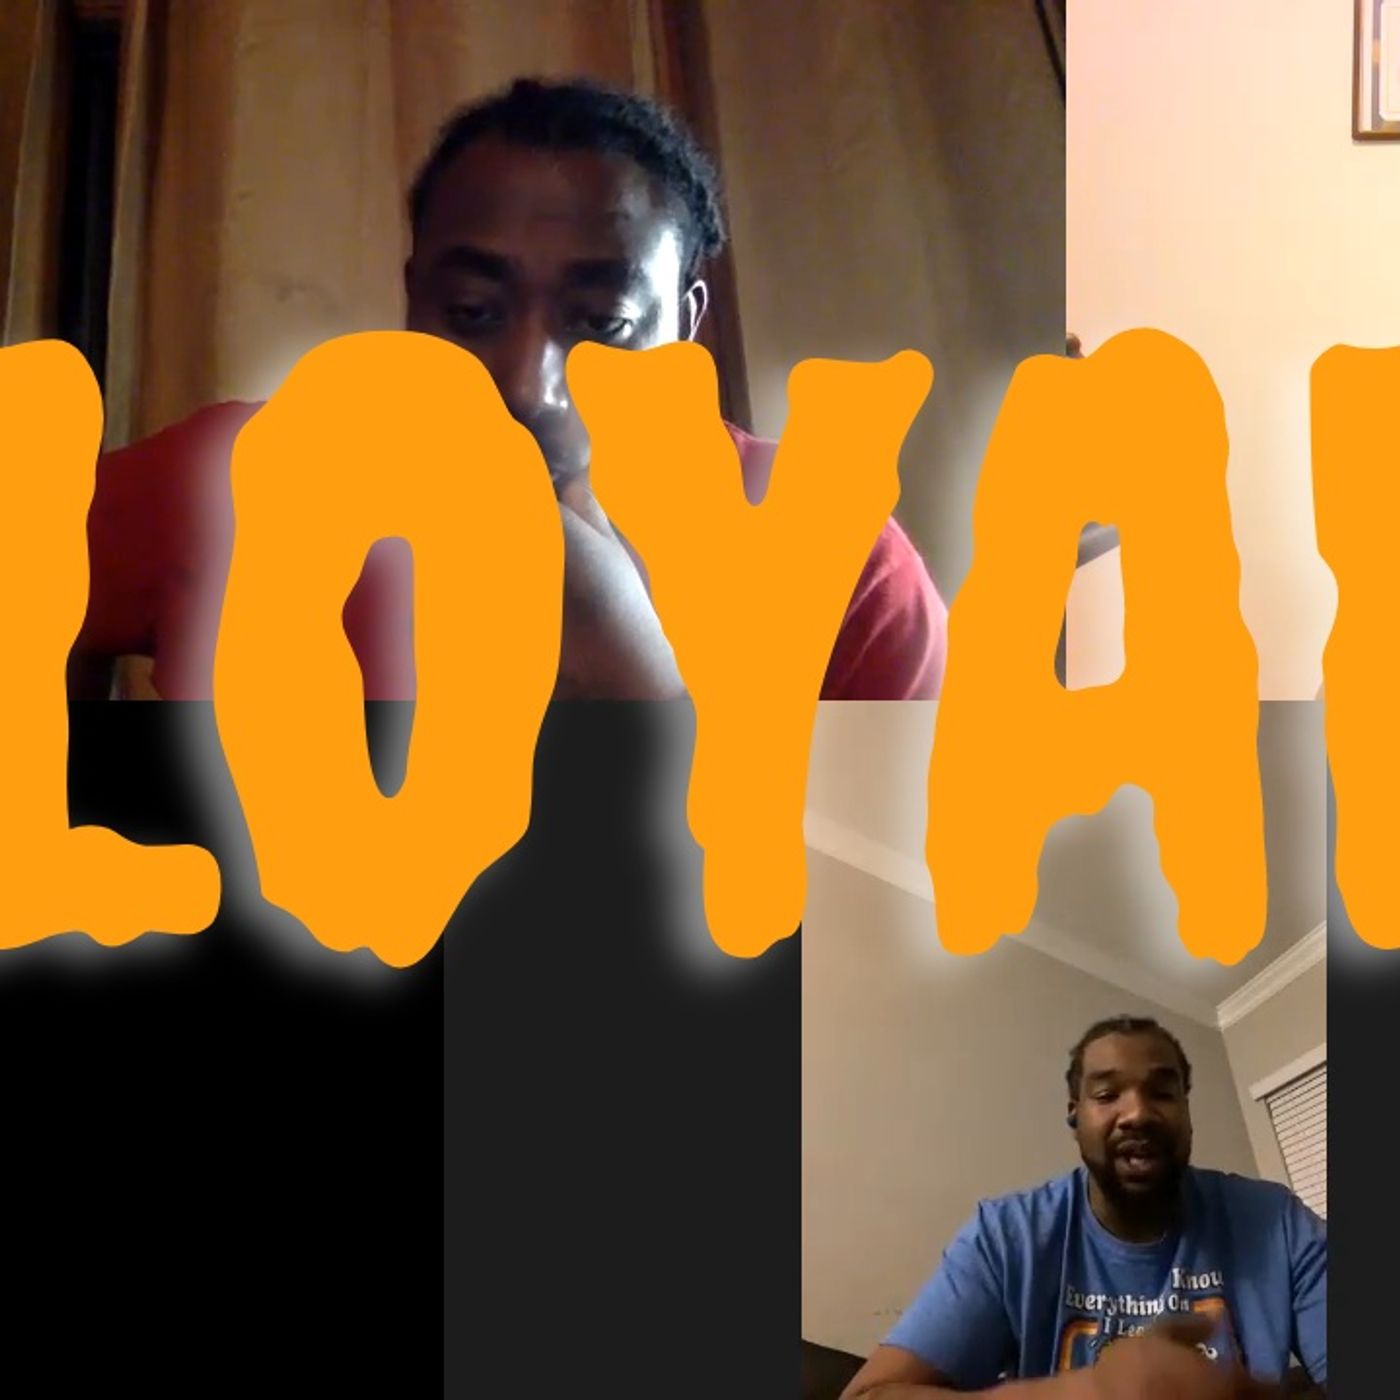 Does Loyalty Have An Expiration Date? (50 cent vs Benzino)